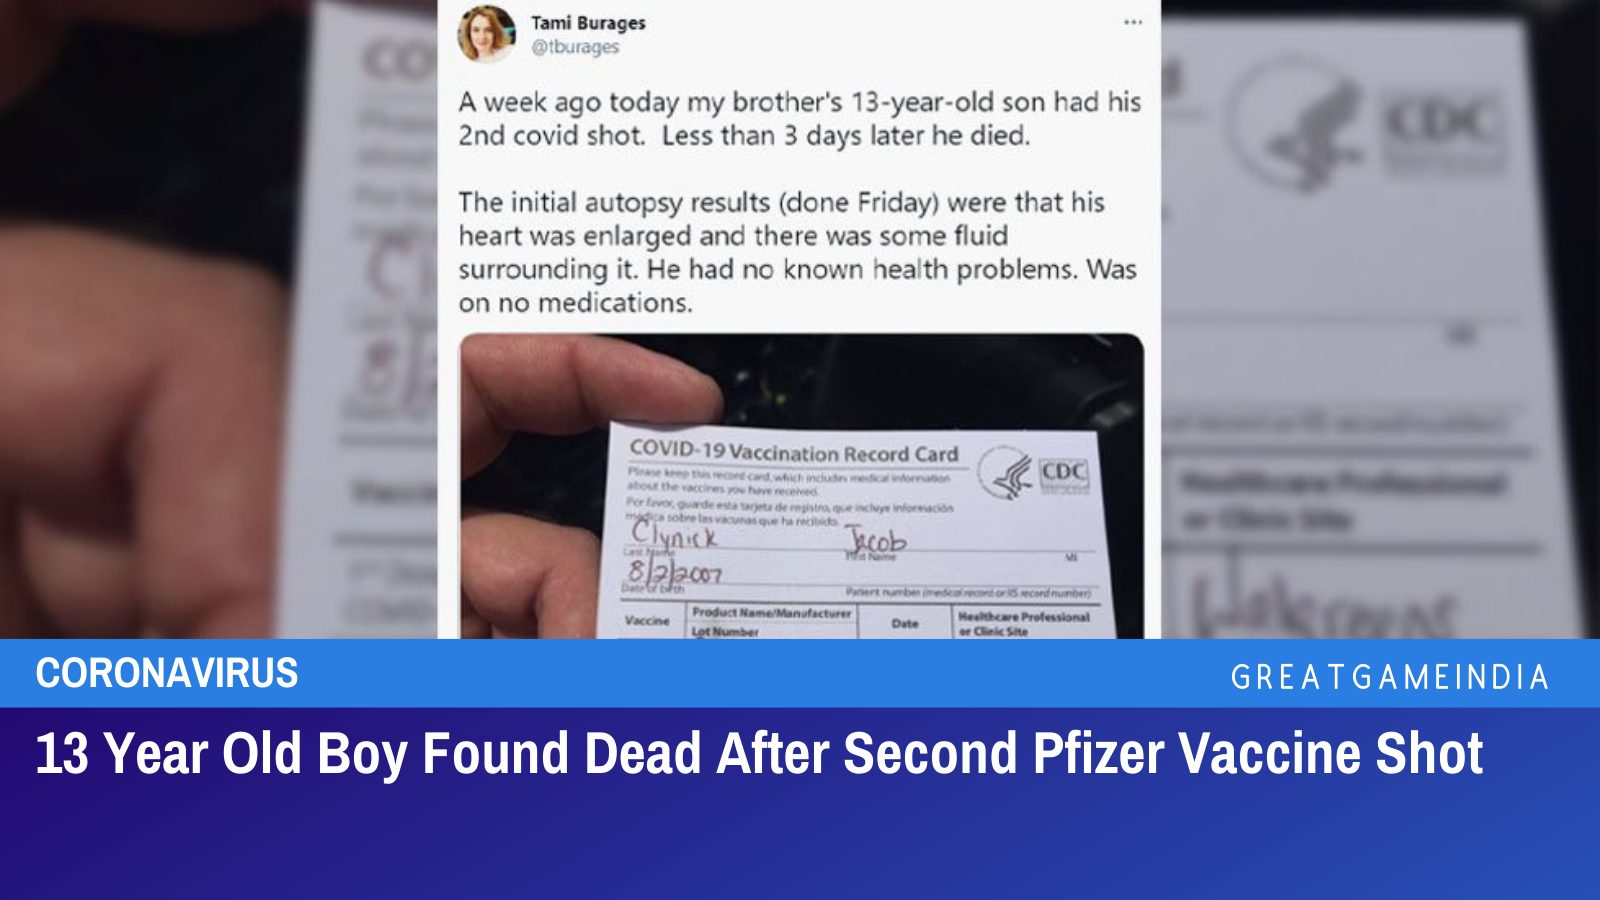 13 Year Old Boy Found Dead From Heart Problems After Second Pfizer Vaccine Shot